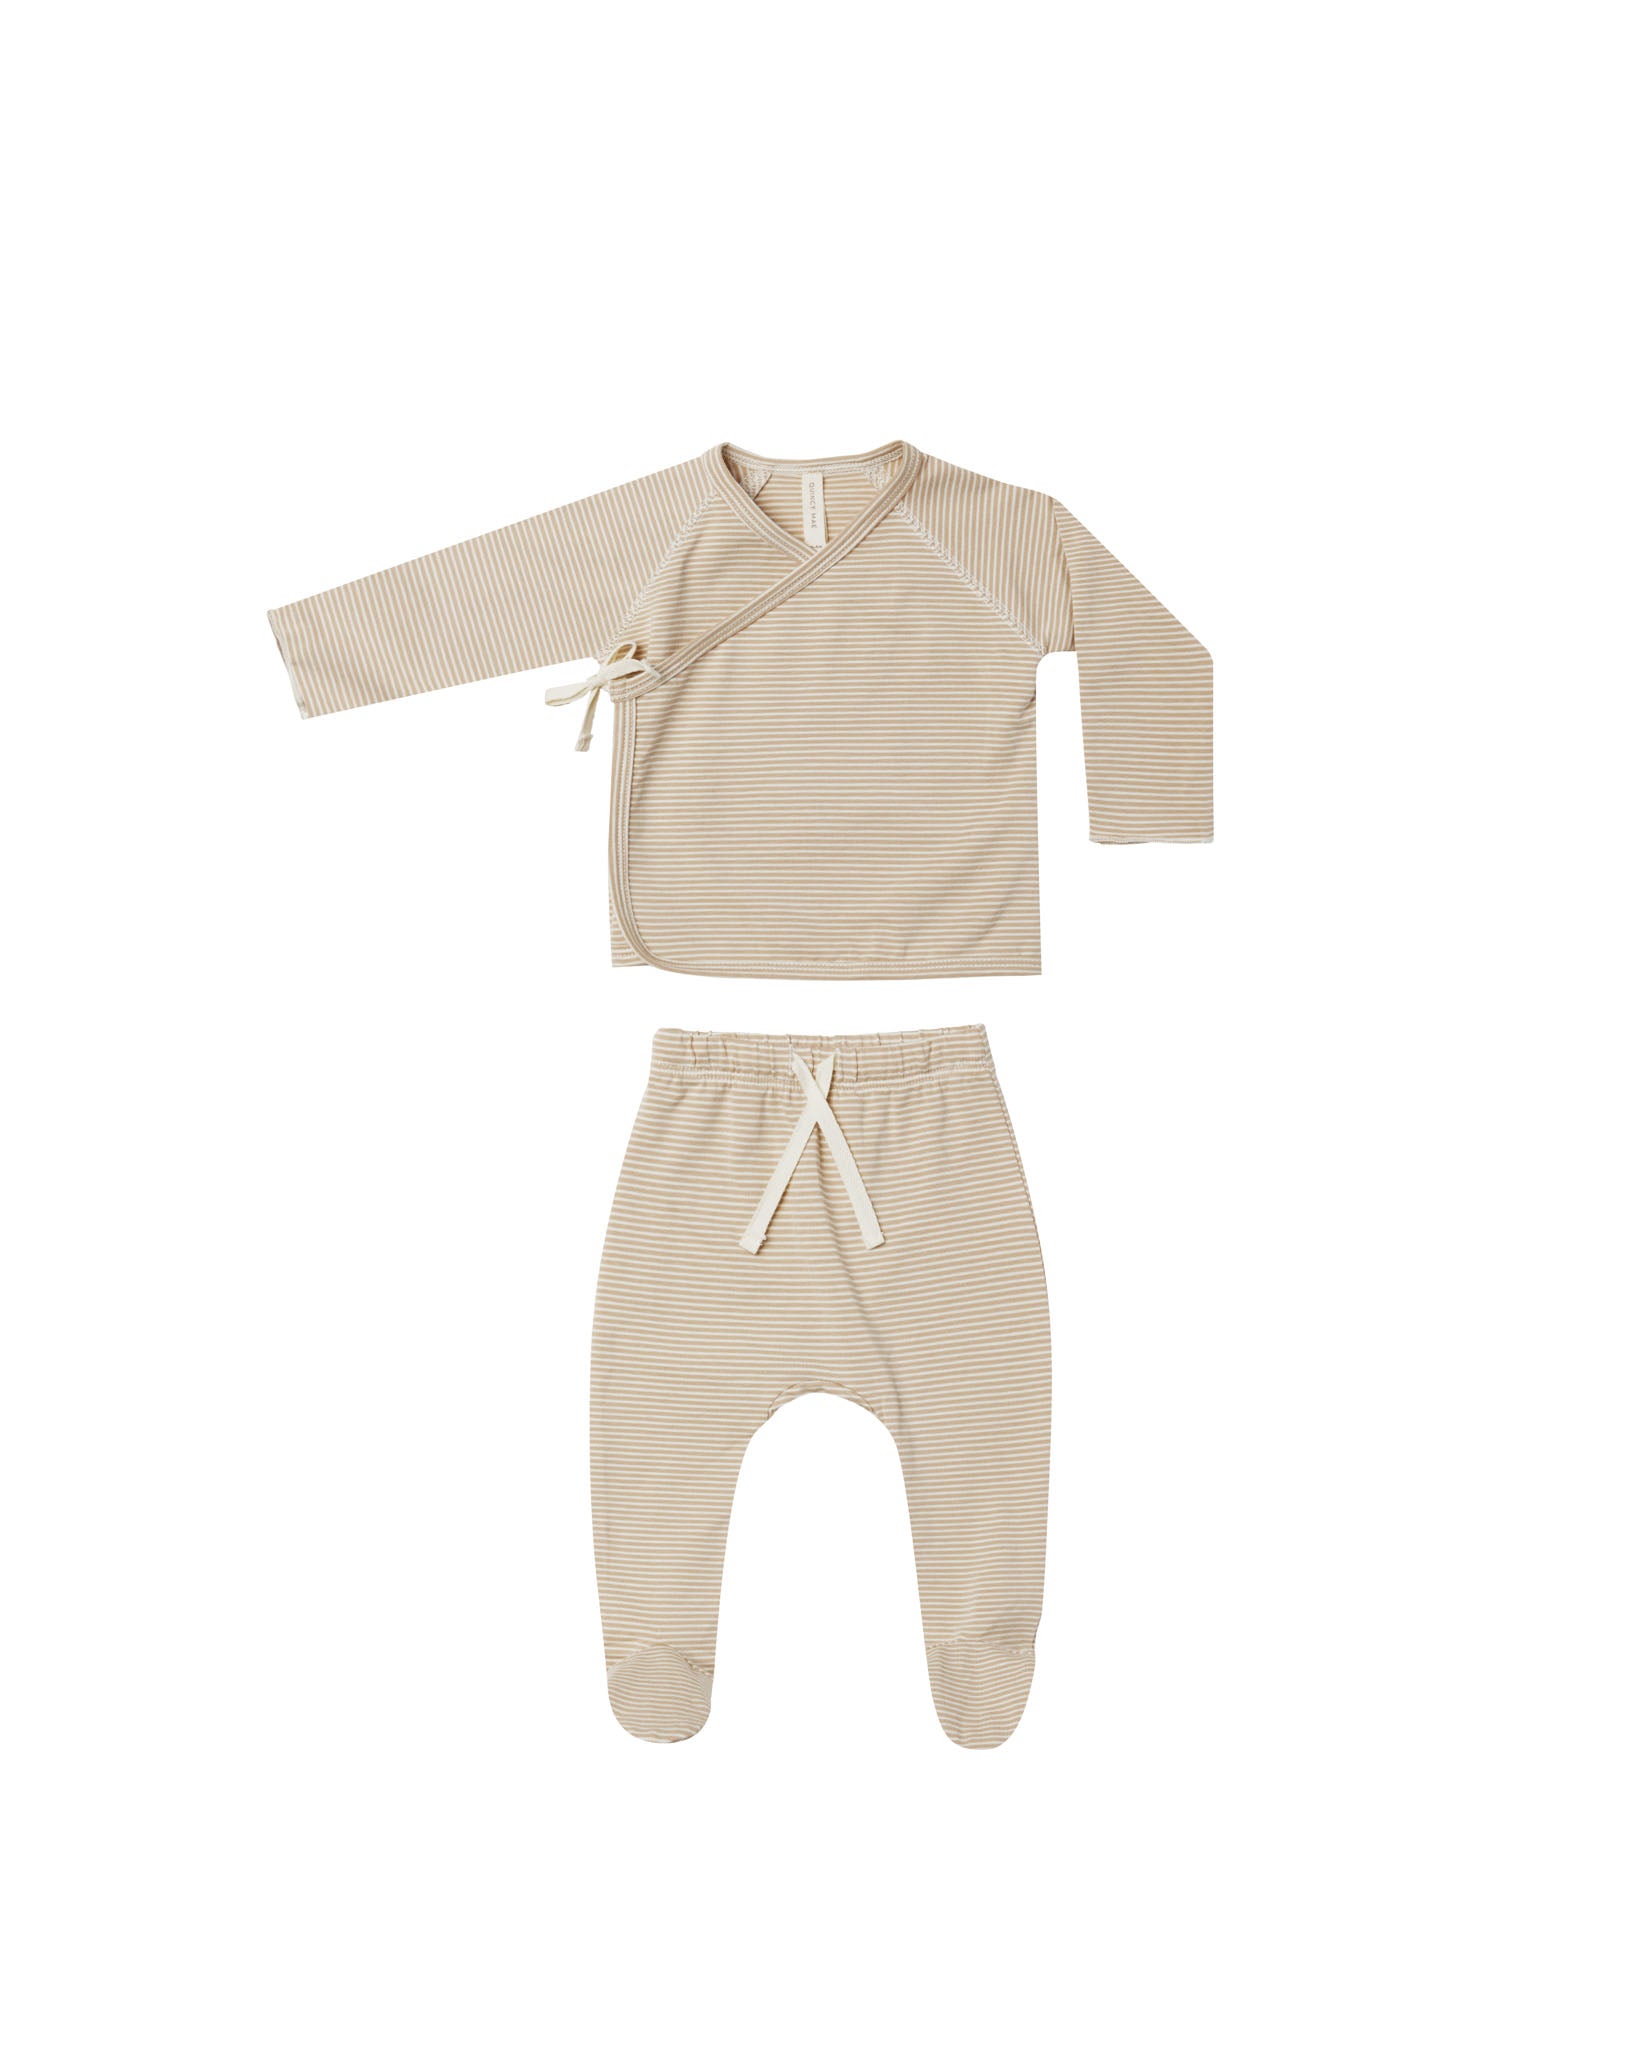 Quincy Mae | Wrap Top + Footed Pant Set || Latte Micro Stripe